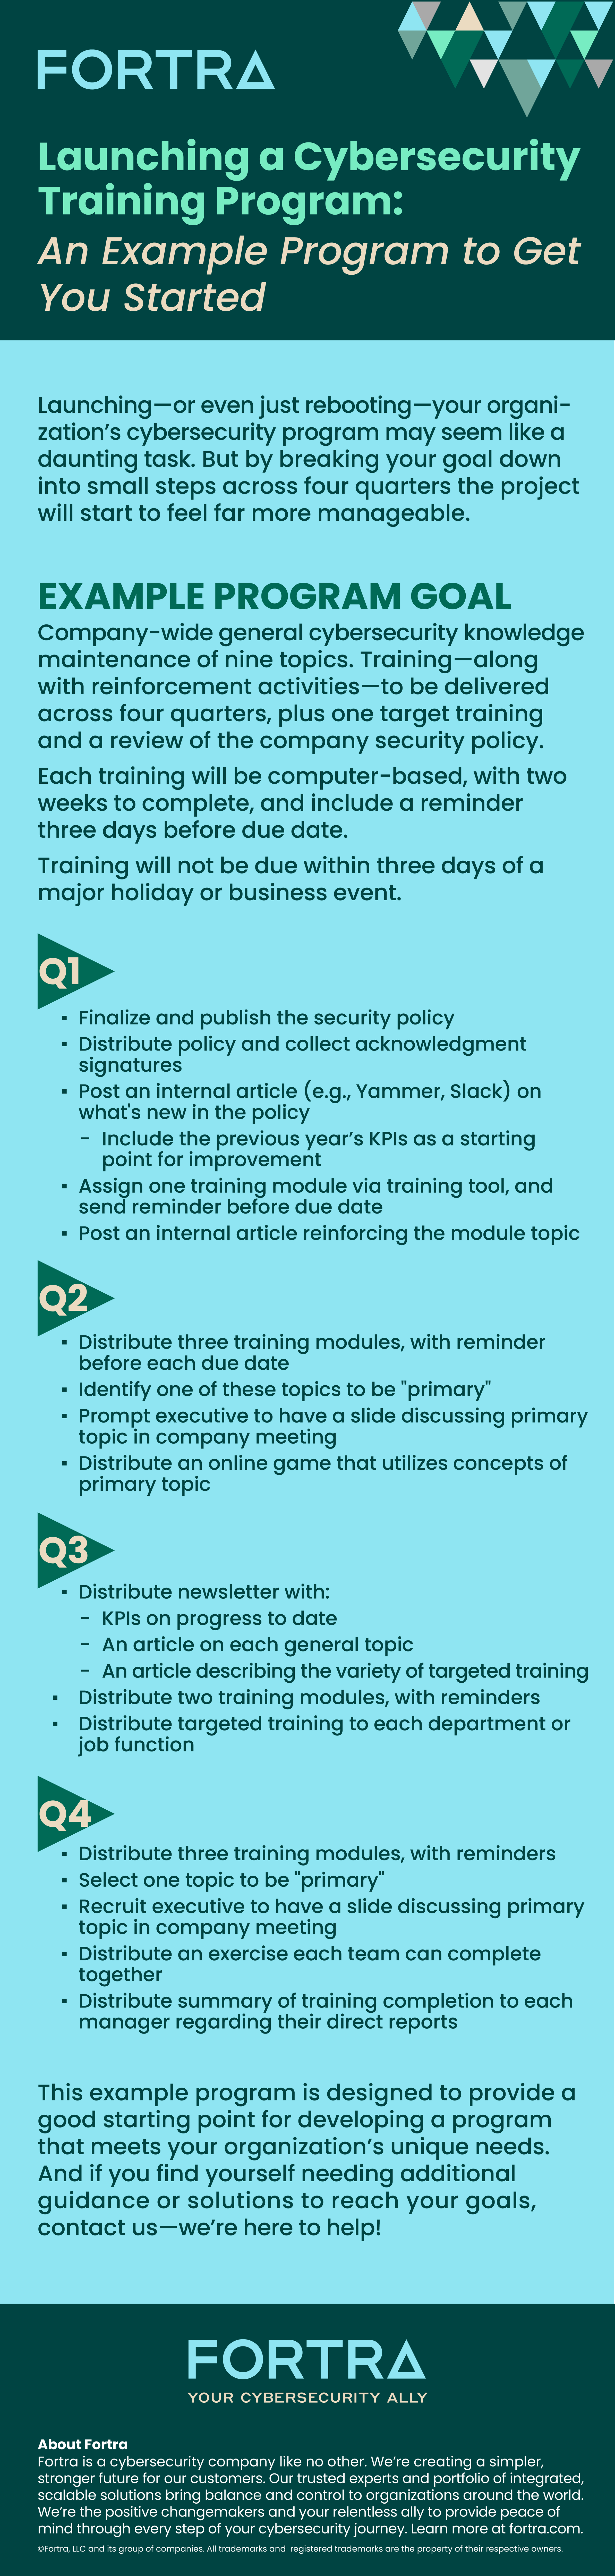 Launching a Cybersecurity Training Program Infographic